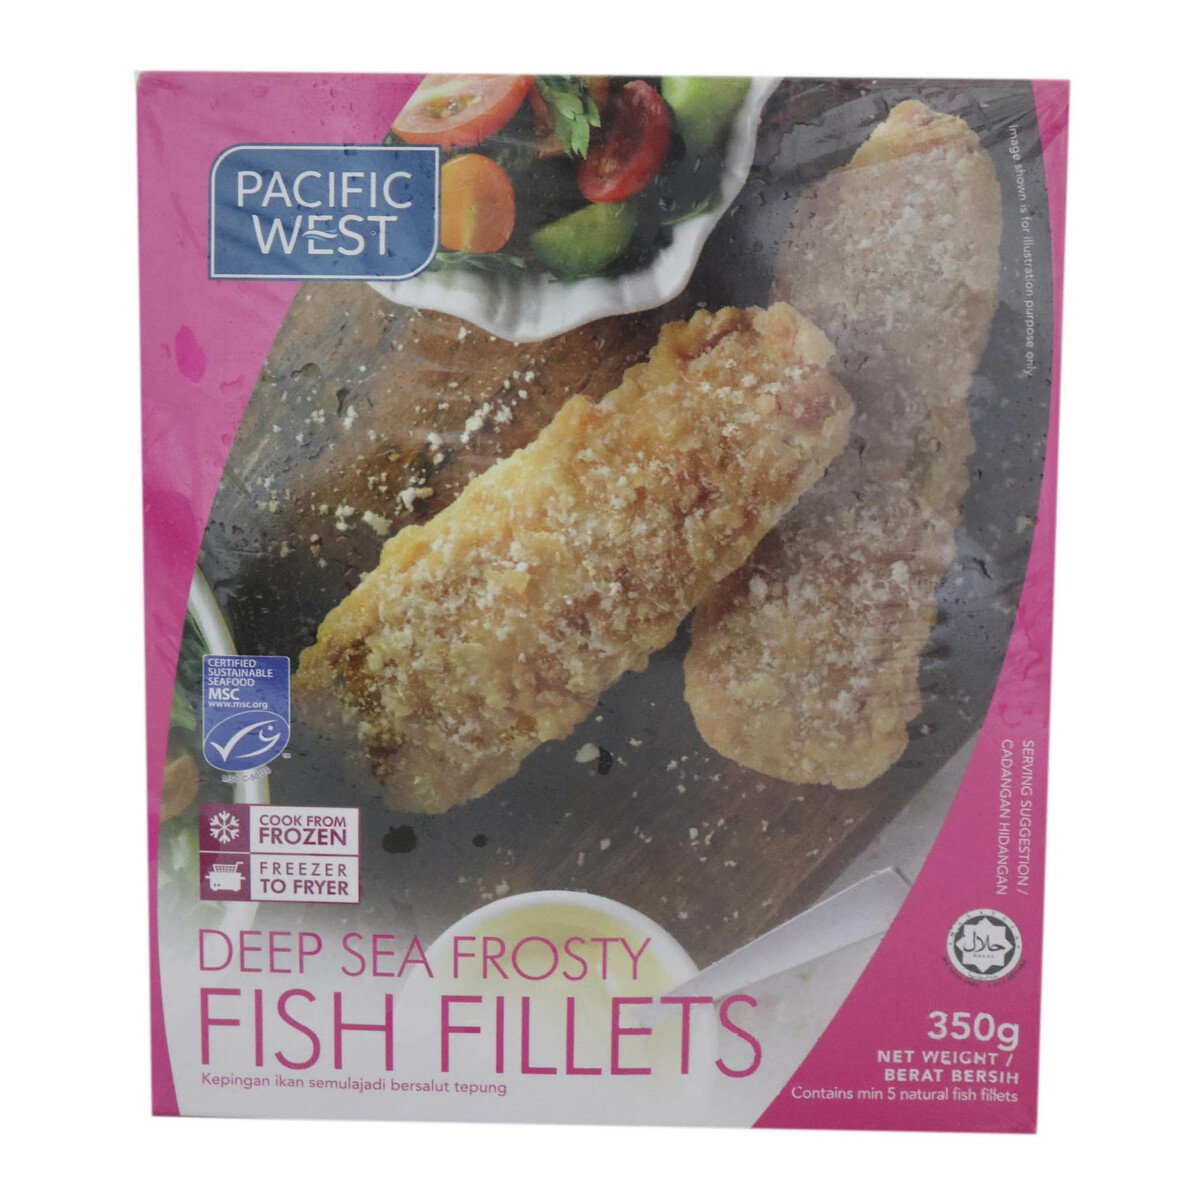 Pacific West Deep Sea Frosty Fish Fillet 350g